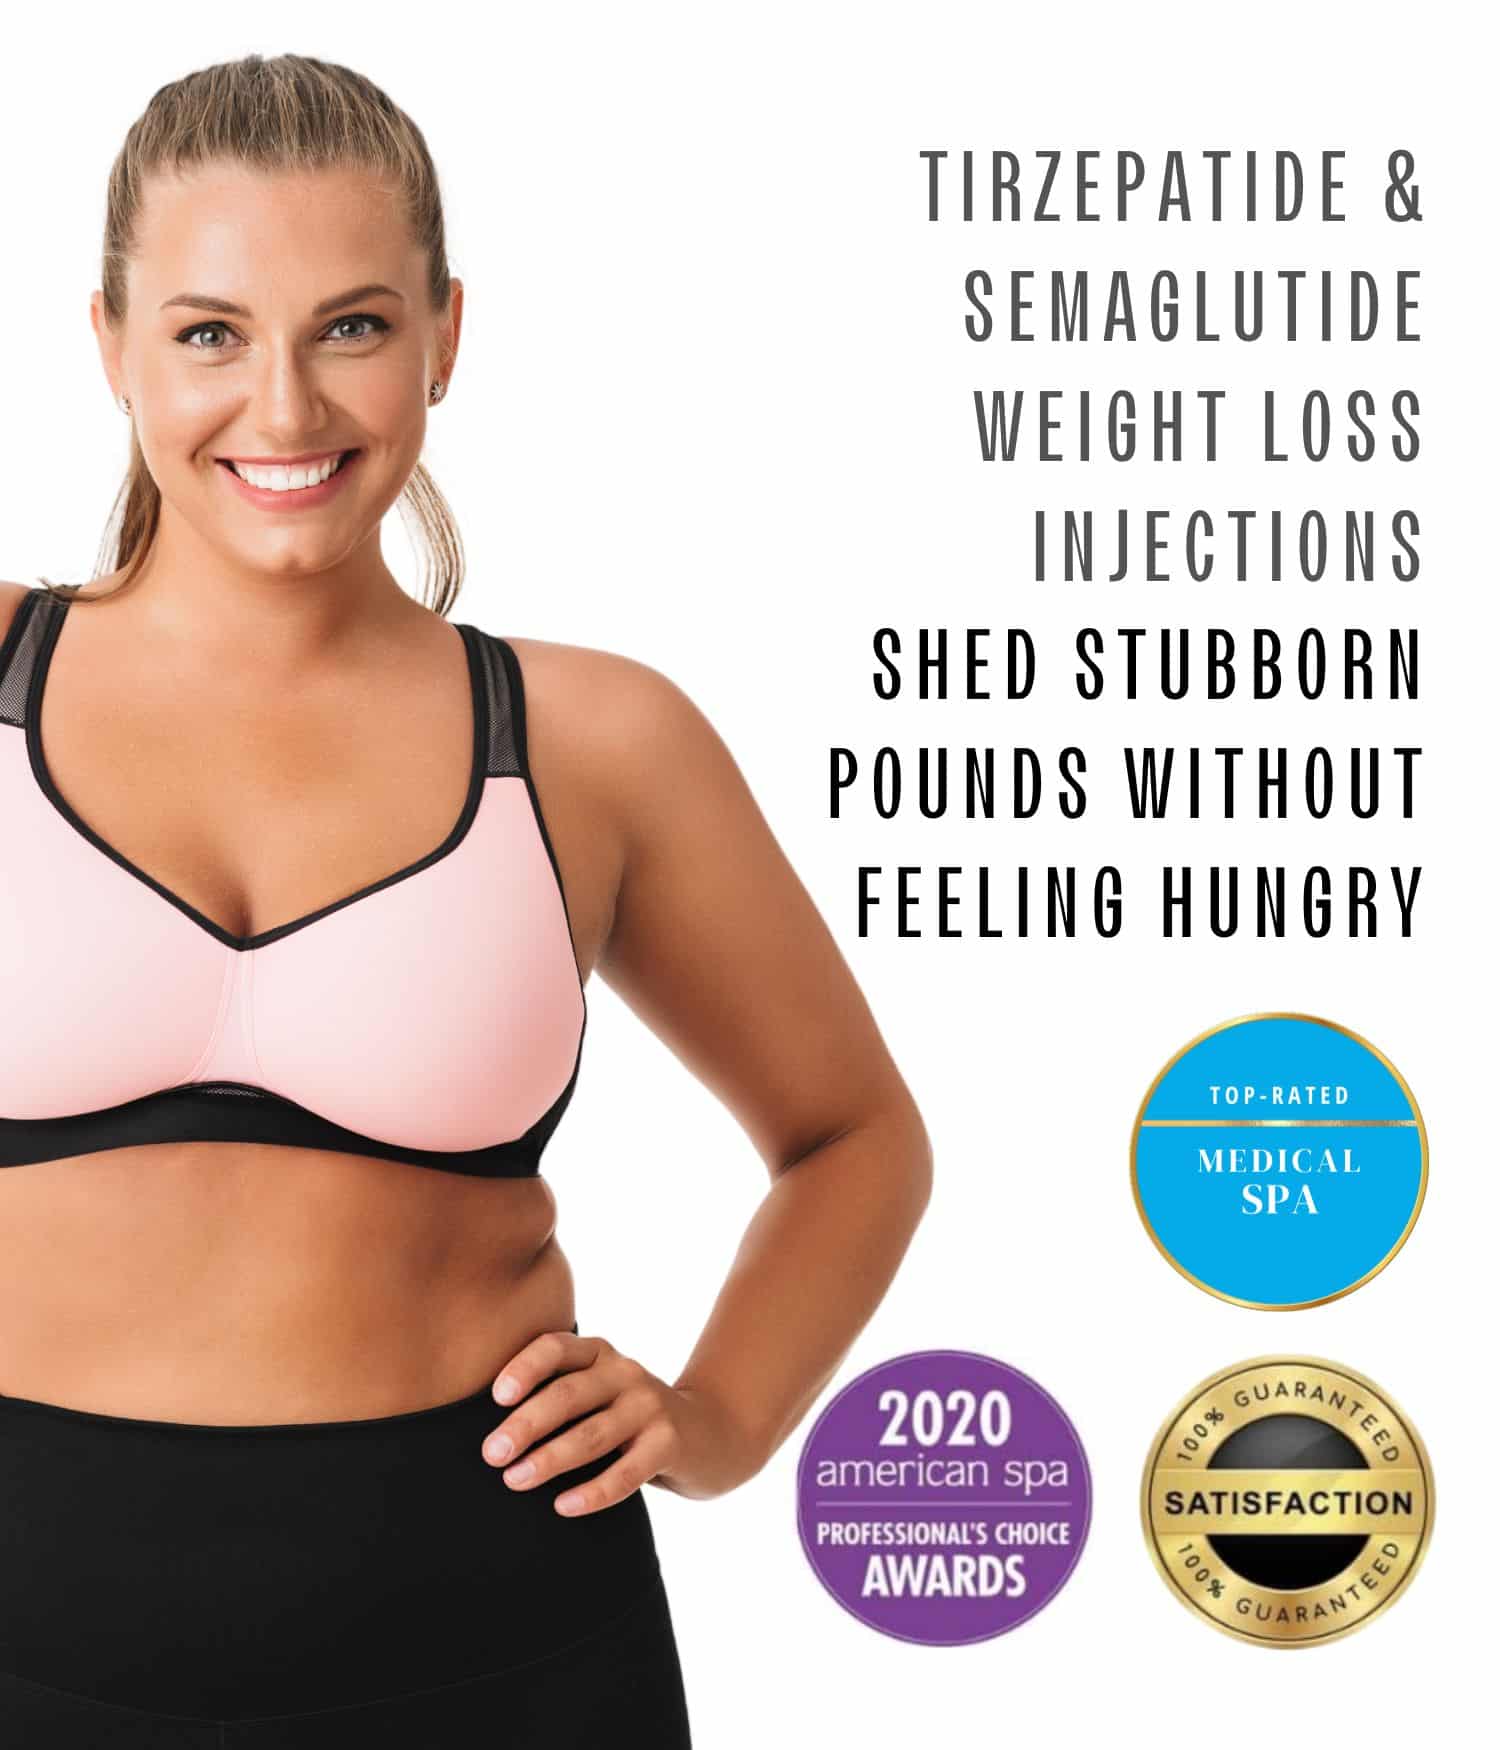 Tirzepatide & Semaglutide Weight Loss Injections